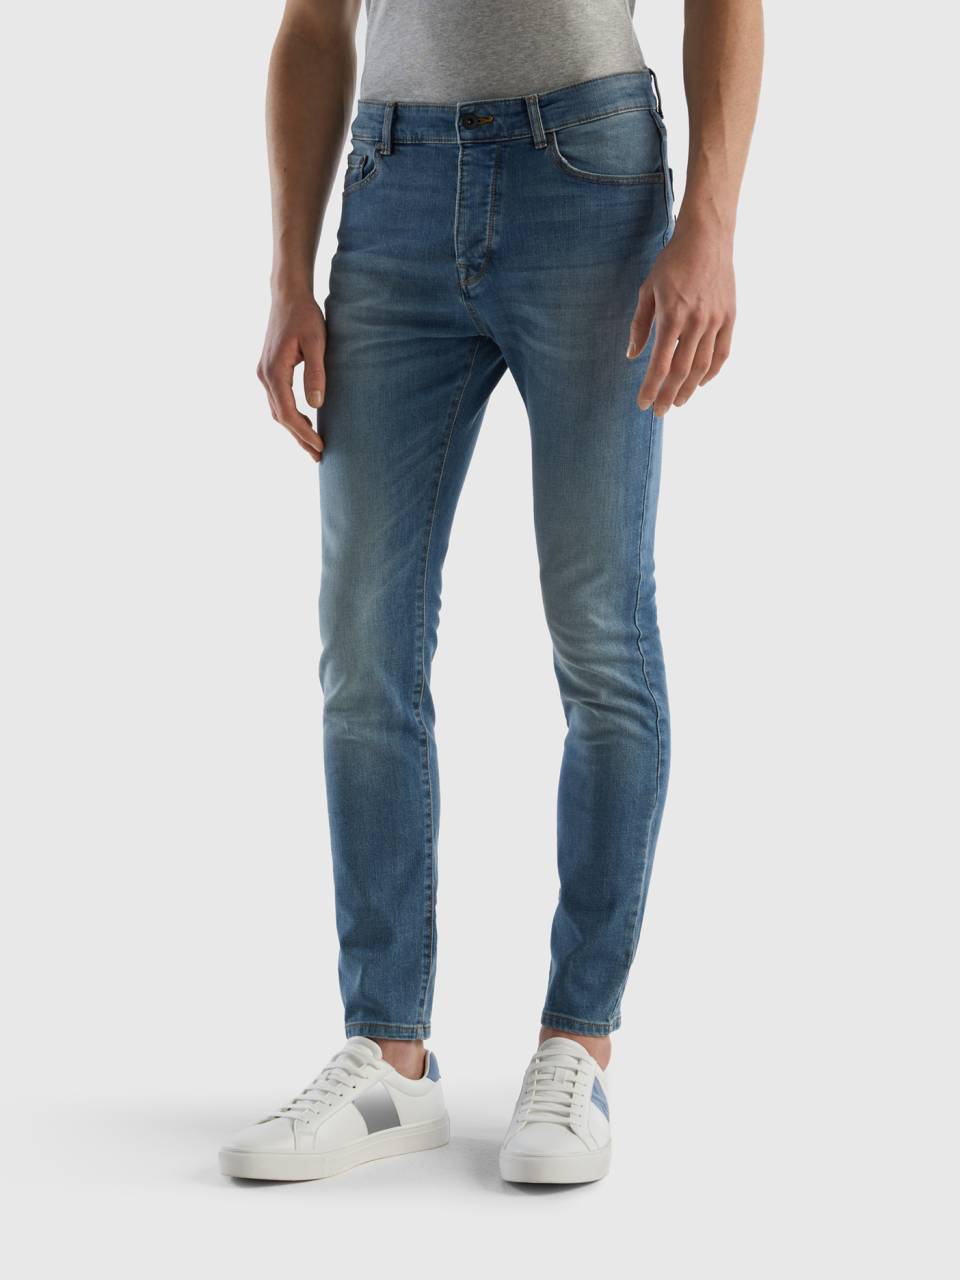 Benetton Jeans coupe skinny. 1